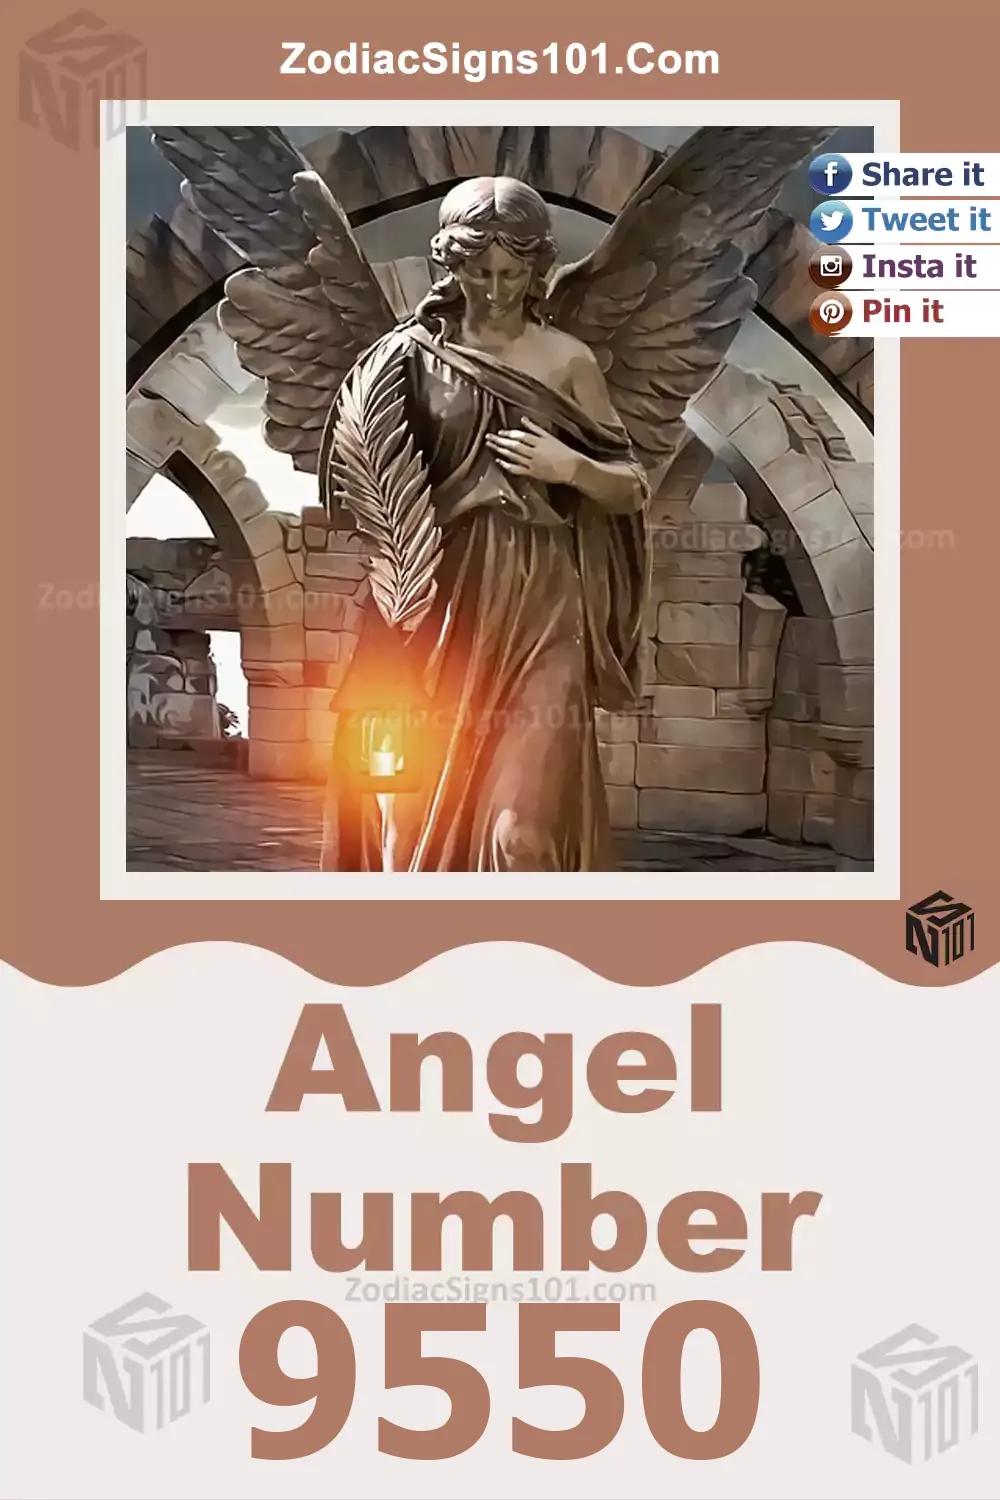 9550 Angel Number Meaning